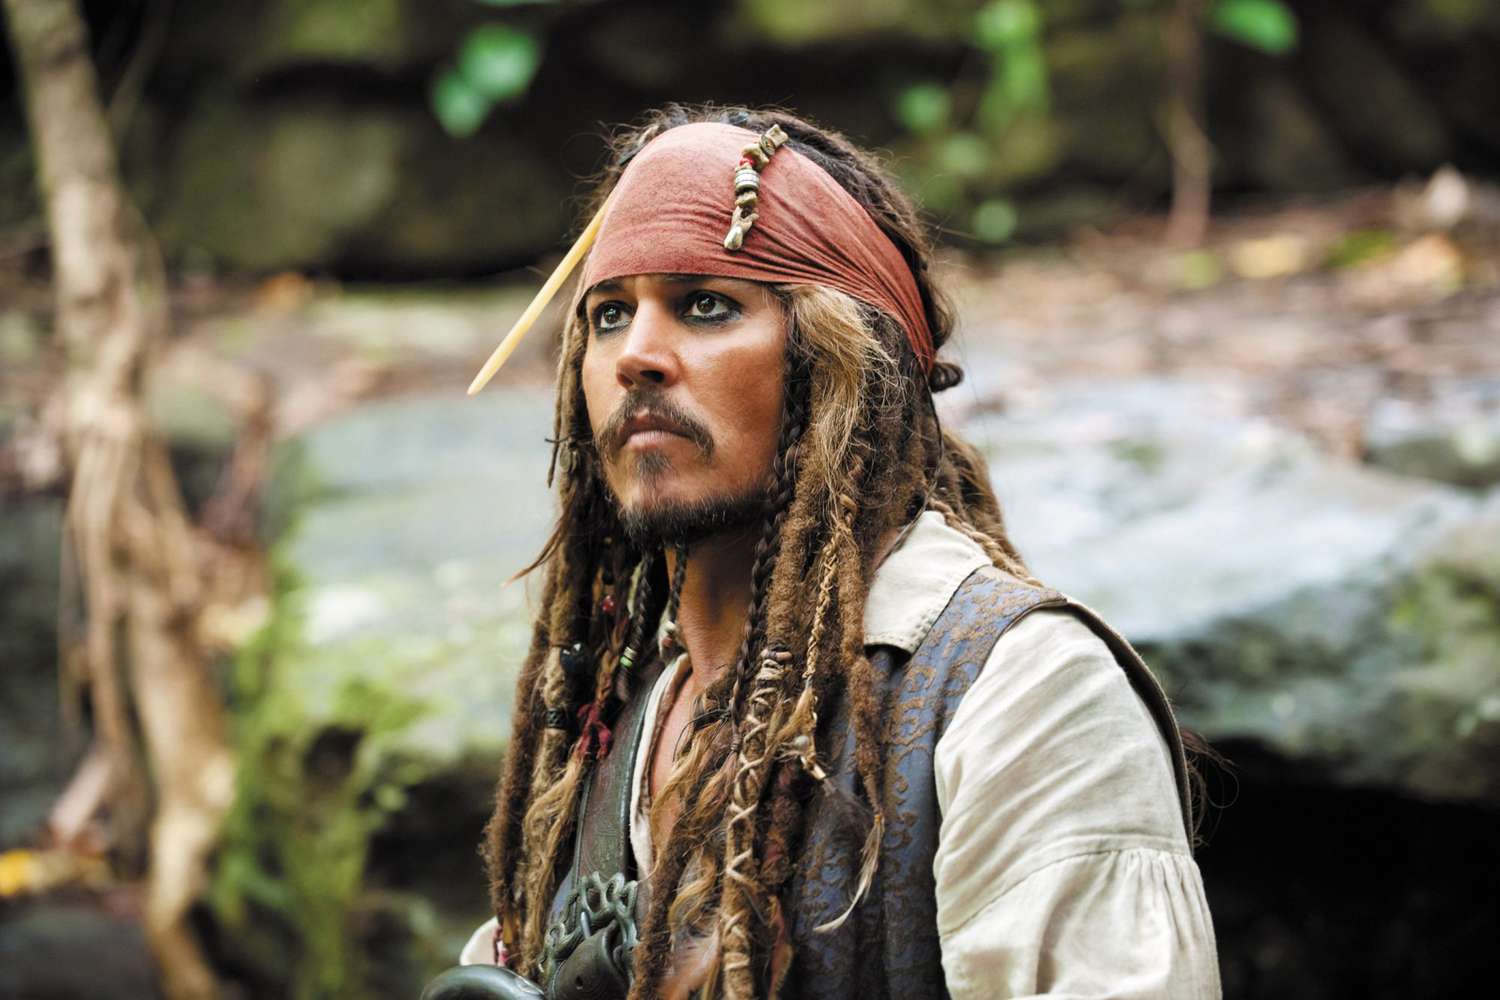 Charting New Waters The Future of Pirates of the Caribbean Without Johnny Depp1